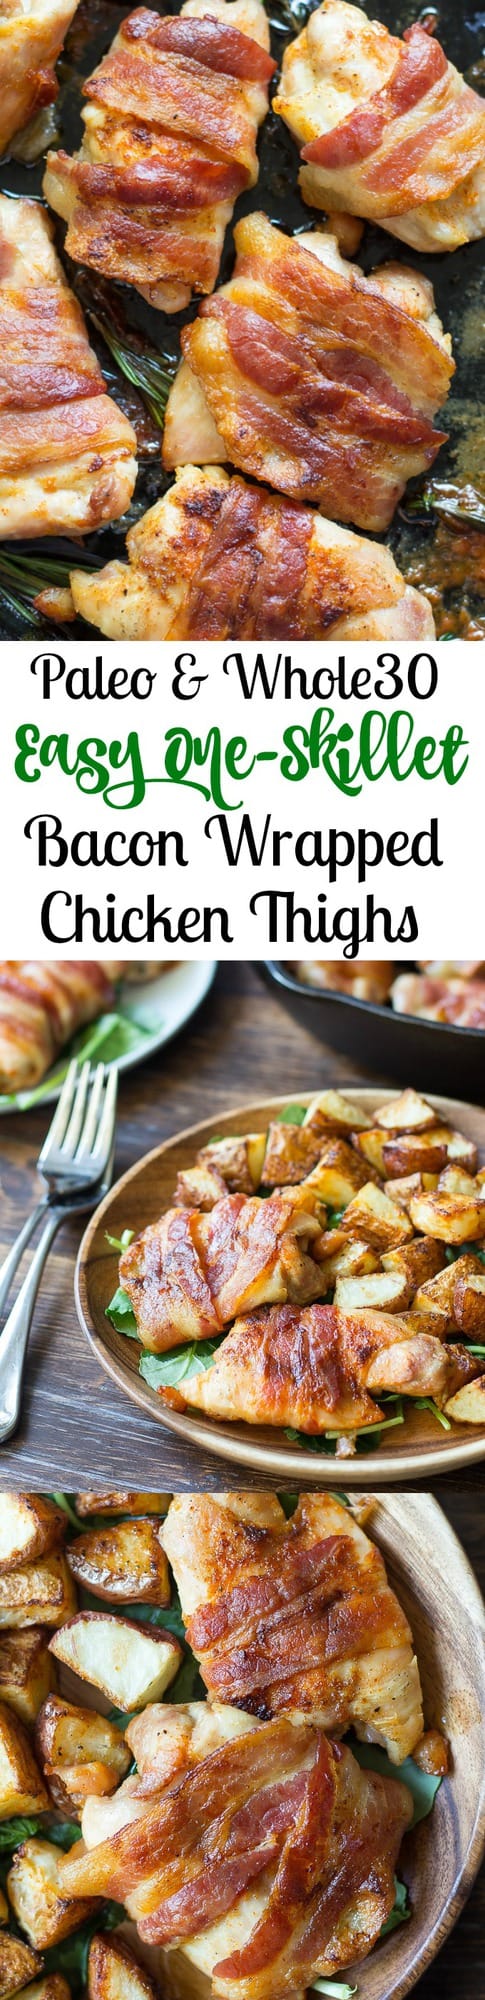 paleo-whole30-easy-one-skillet-bacon-wrapped-chicken-thighs